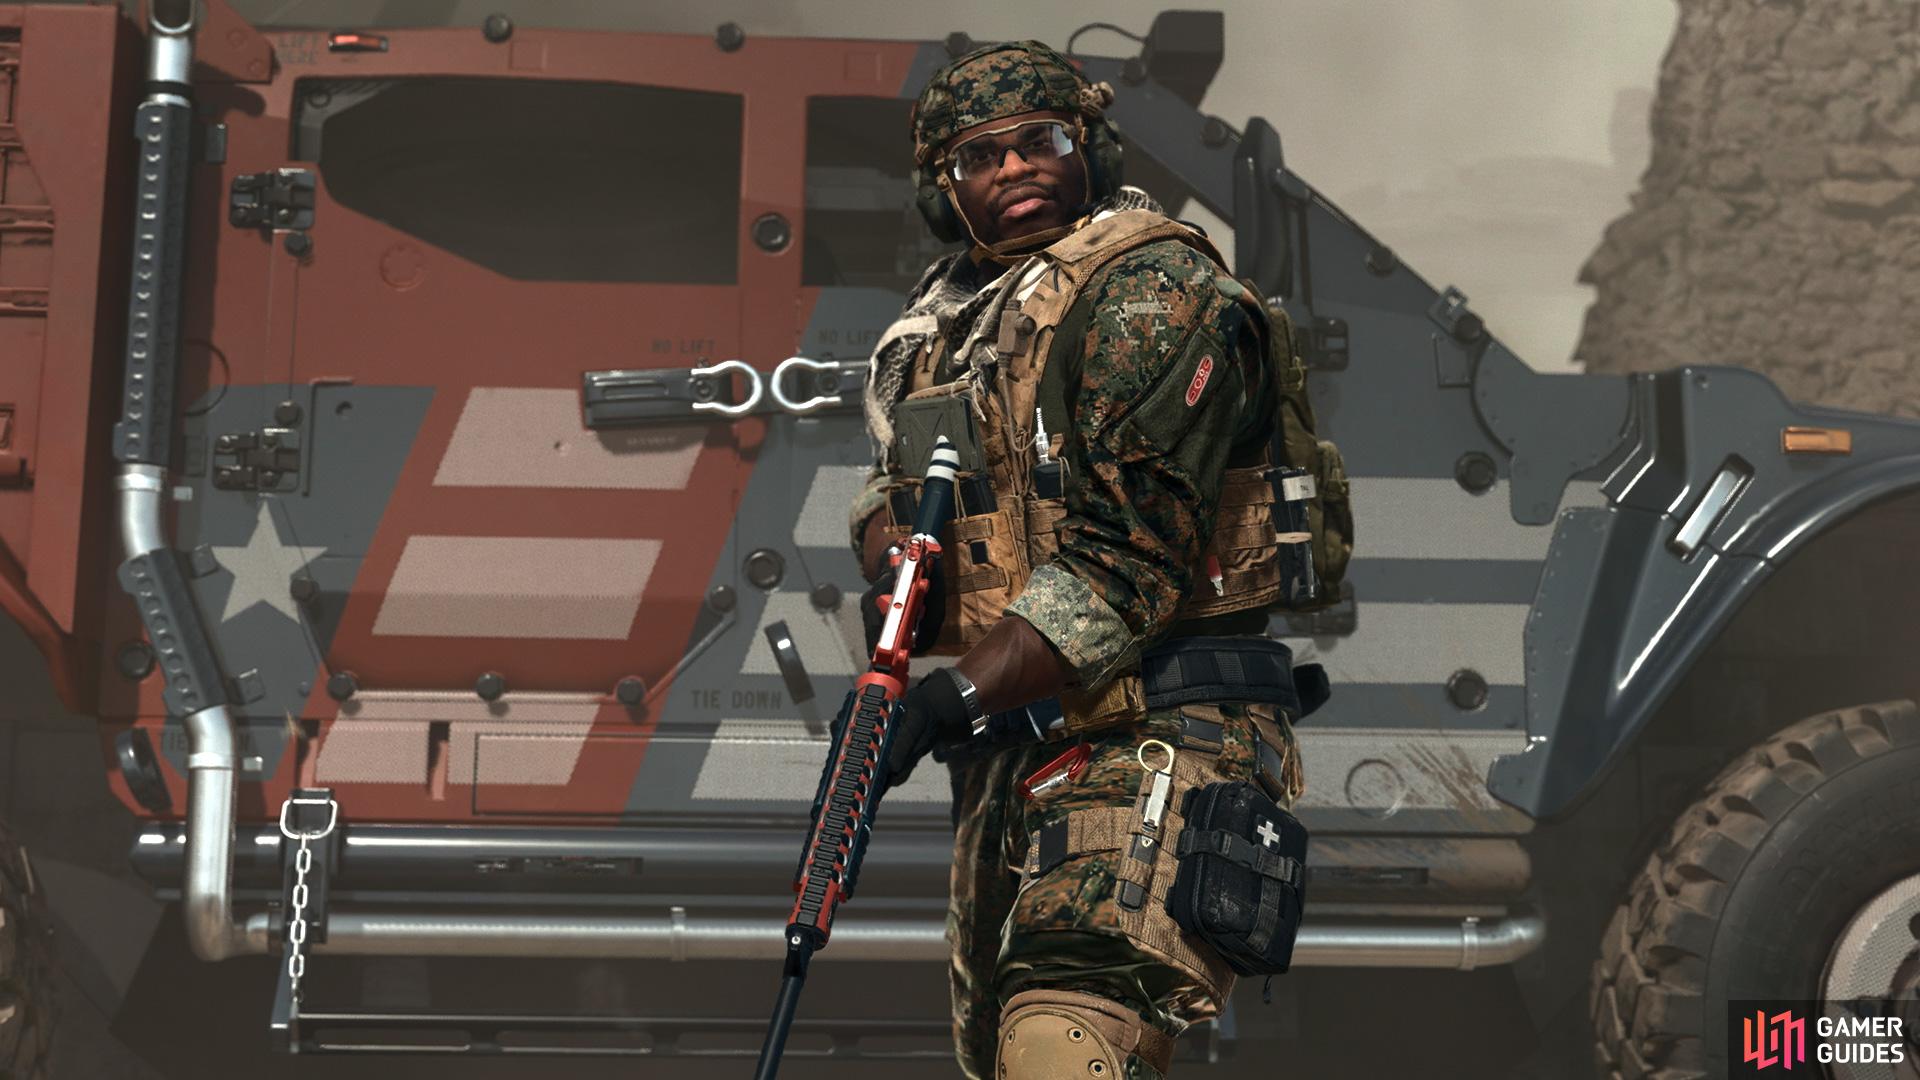 Operator Hutch gets a new Protector skin for use in-game.